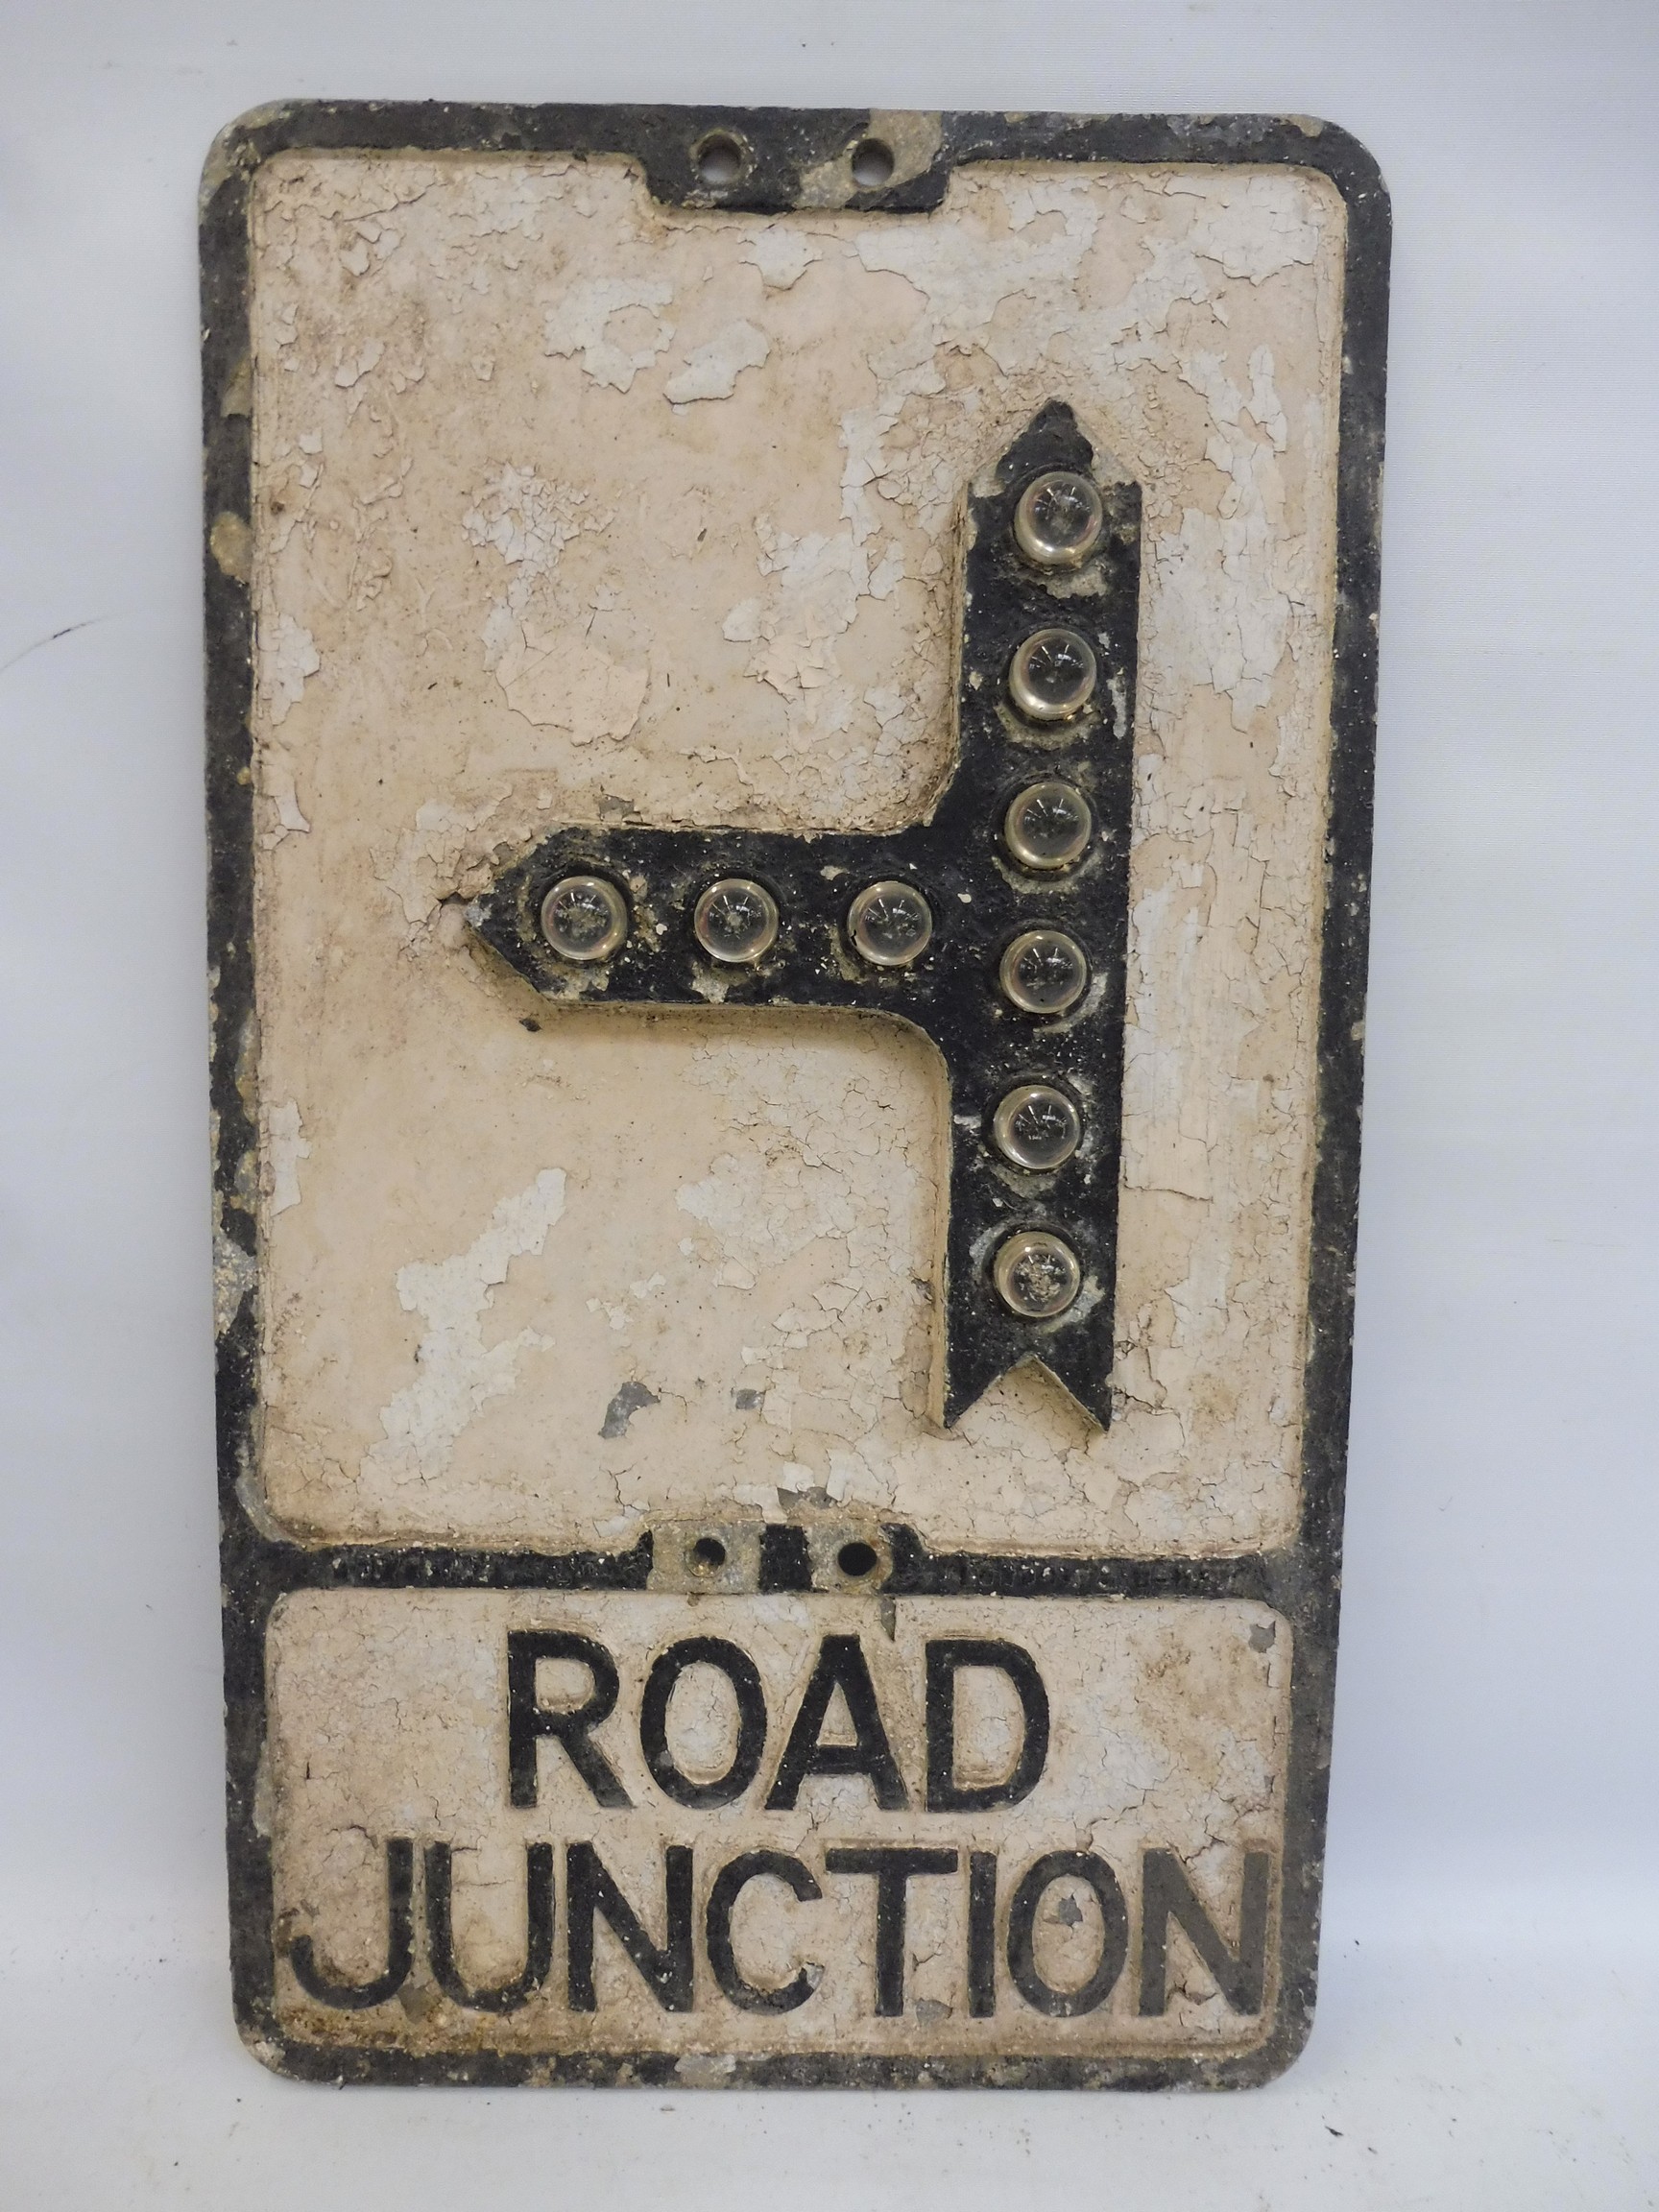 An aluminum road sign - Road Junction by Gowshall Limited with raised glass reflectors, 12 x 21".